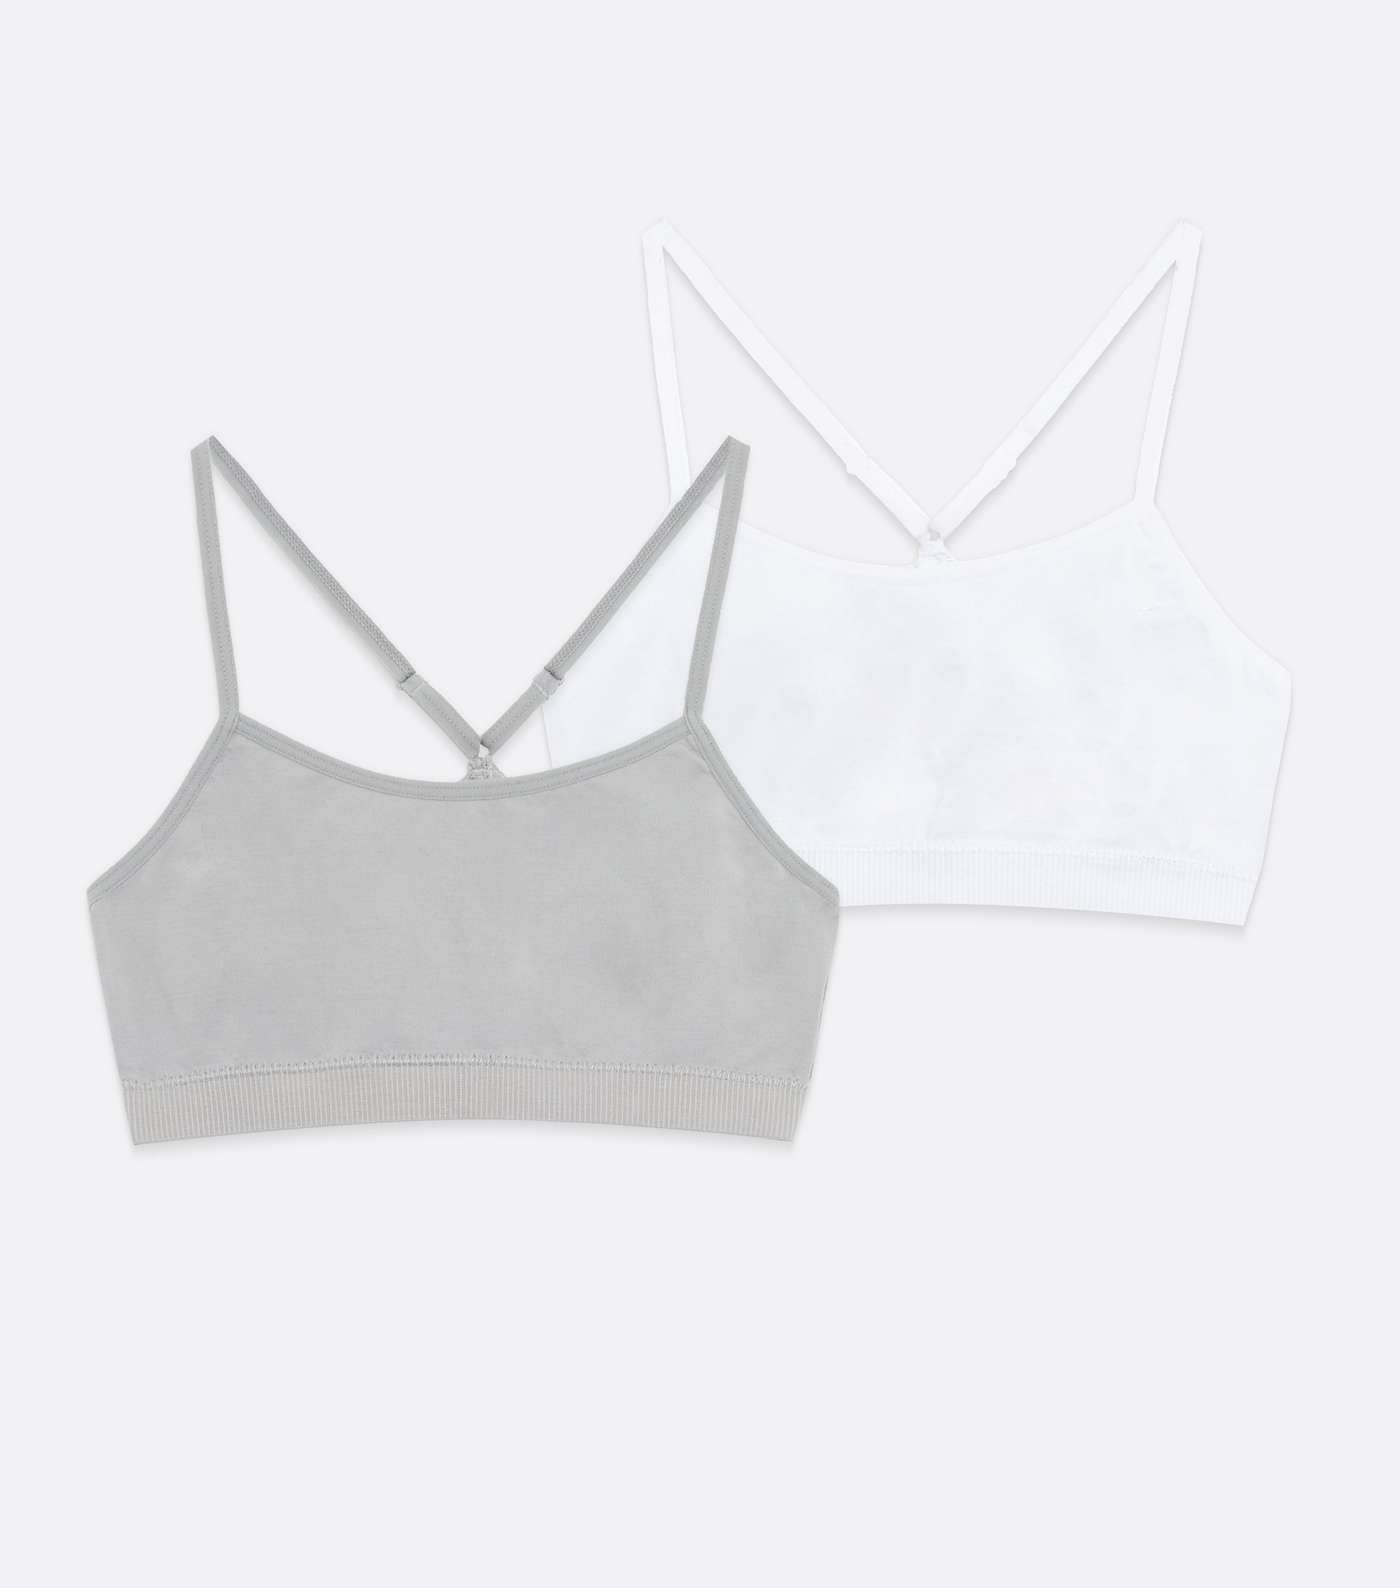 Girls 2 Pack Pale Grey and White Lace Back Crop Tops